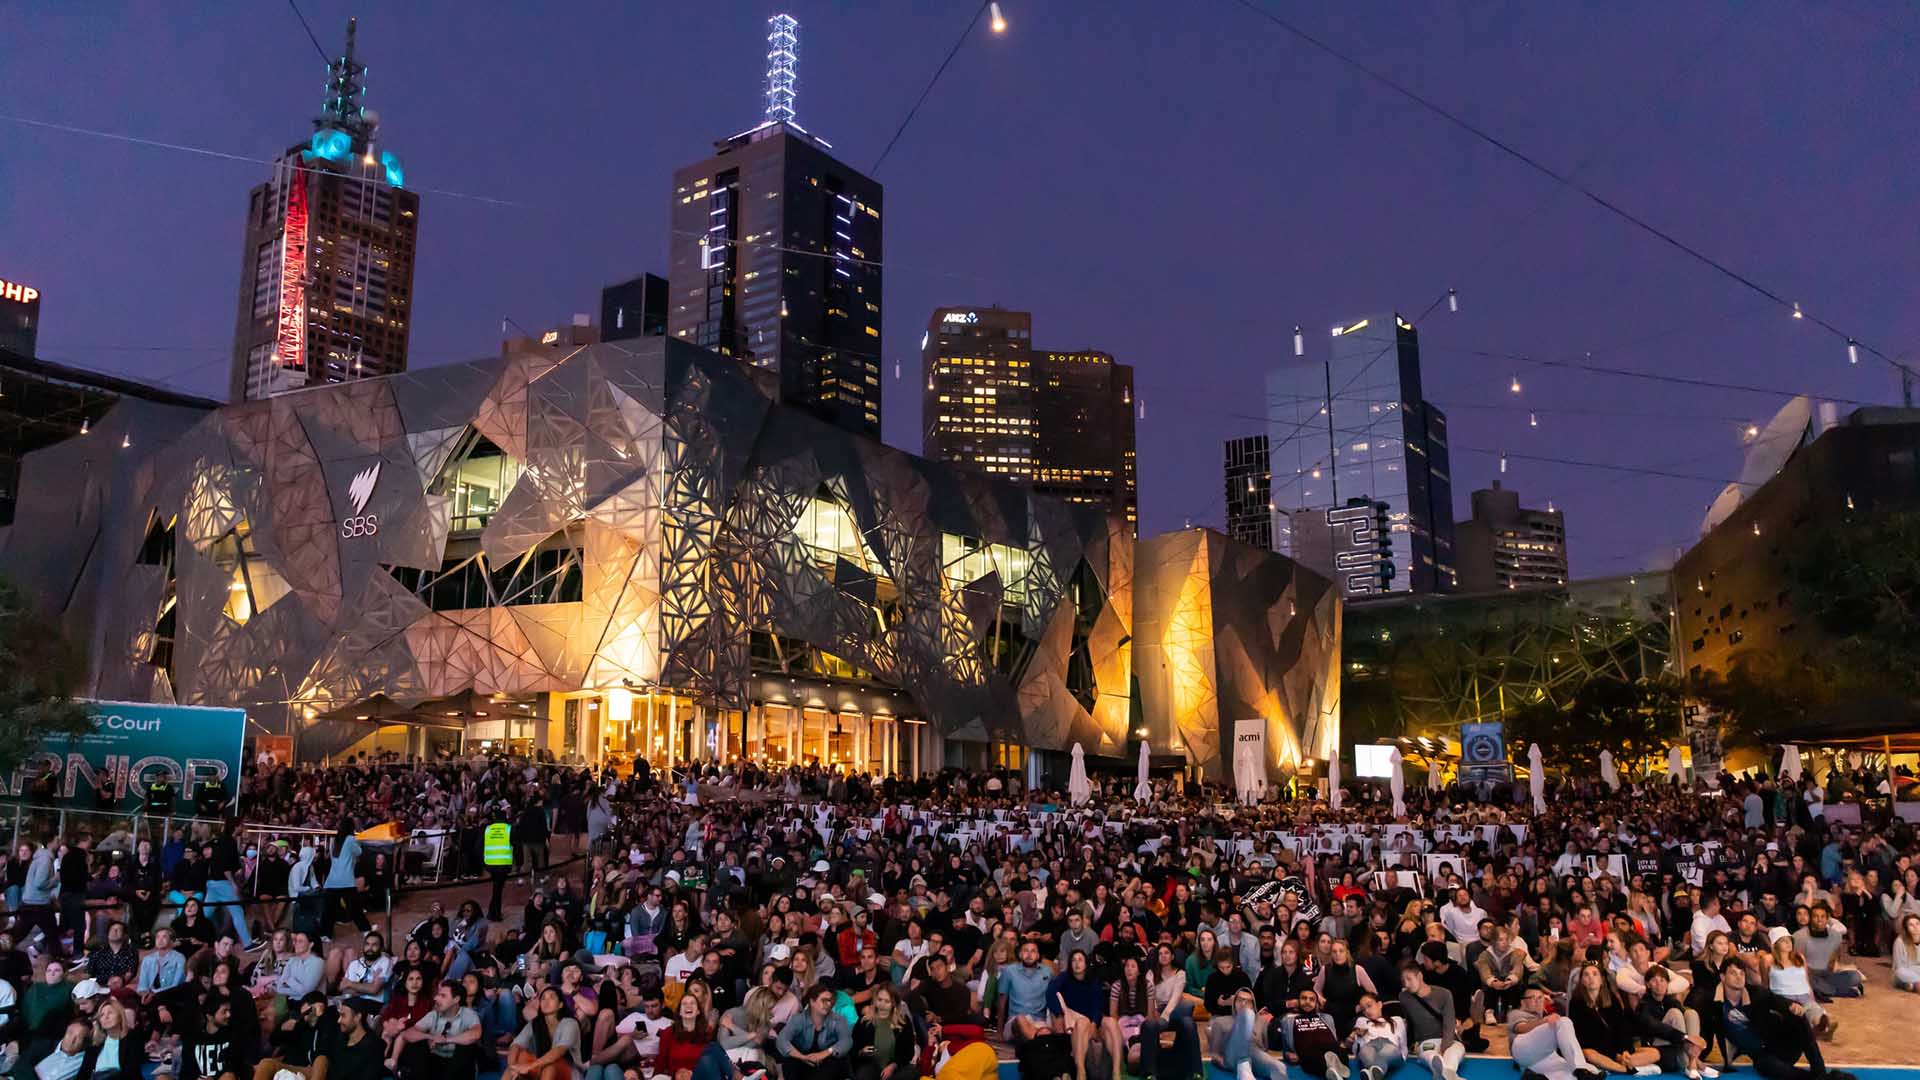 Federation Square Is Set to Receive a $20 Million Makeover